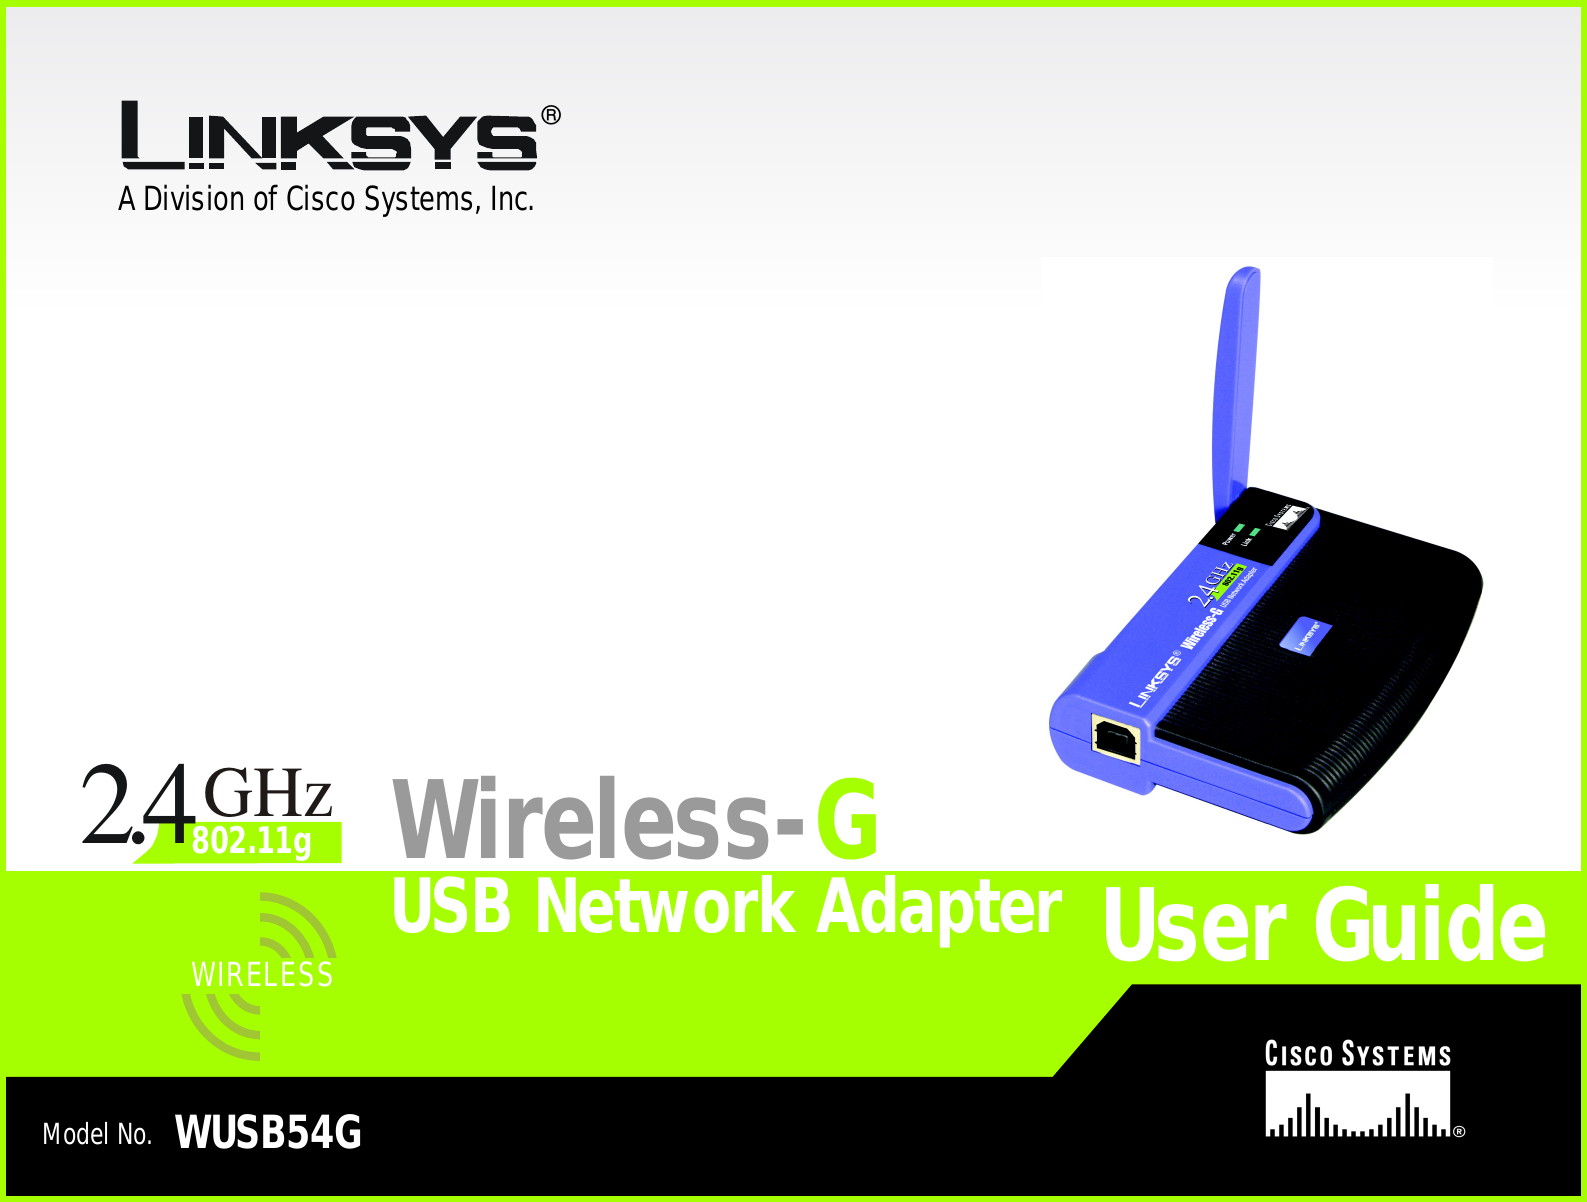 A Division of Cisco Systems, Inc.®Model No.USB Network AdapterWireless-GWUSB54GUser GuideWIRELESSGHz2.4802.11g